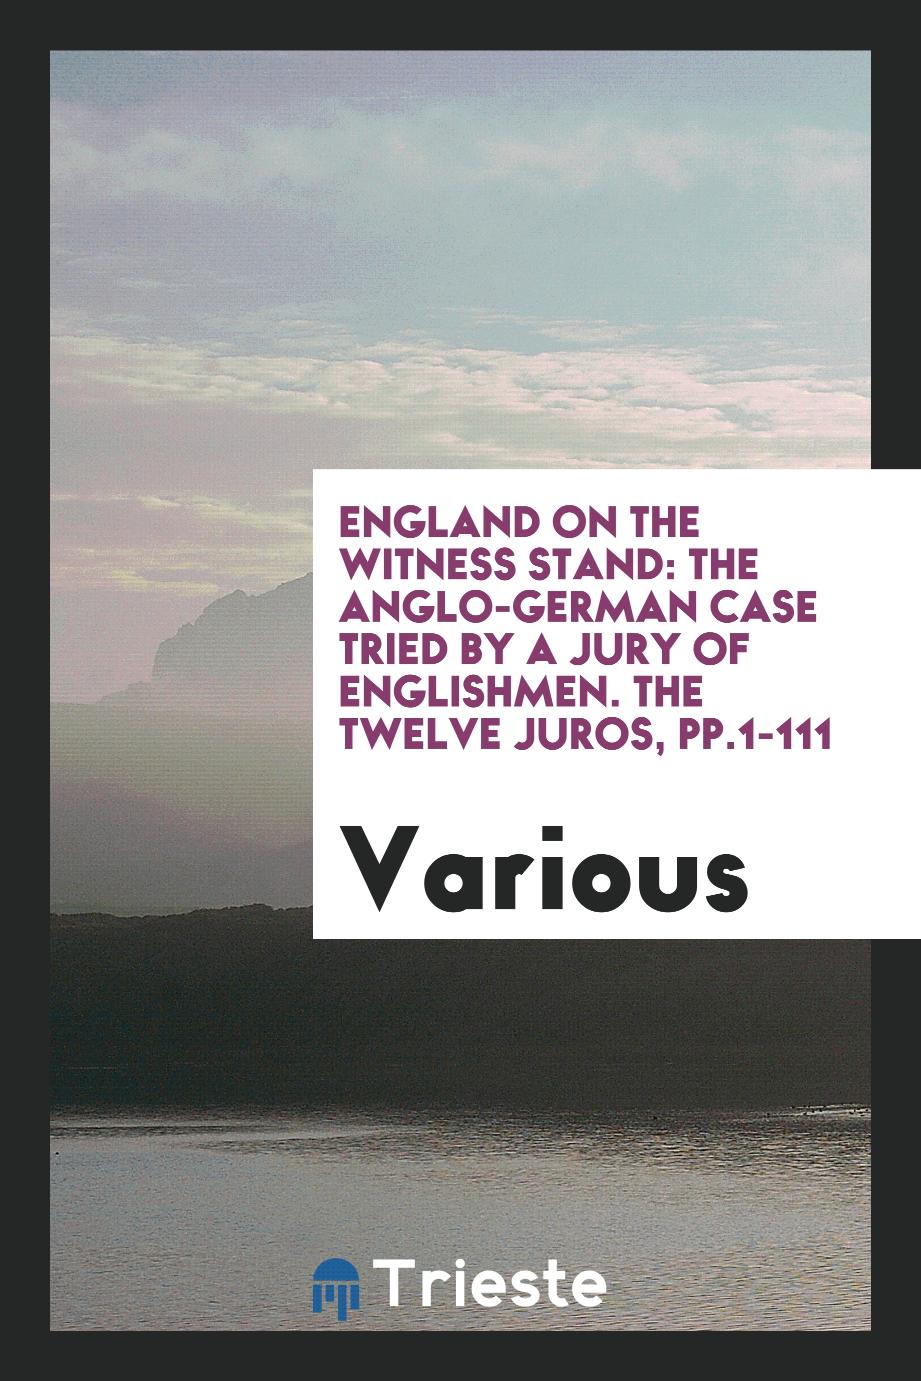 England on the Witness Stand: The Anglo-German Case Tried by a Jury of Englishmen. The Twelve Juros, pp.1-111